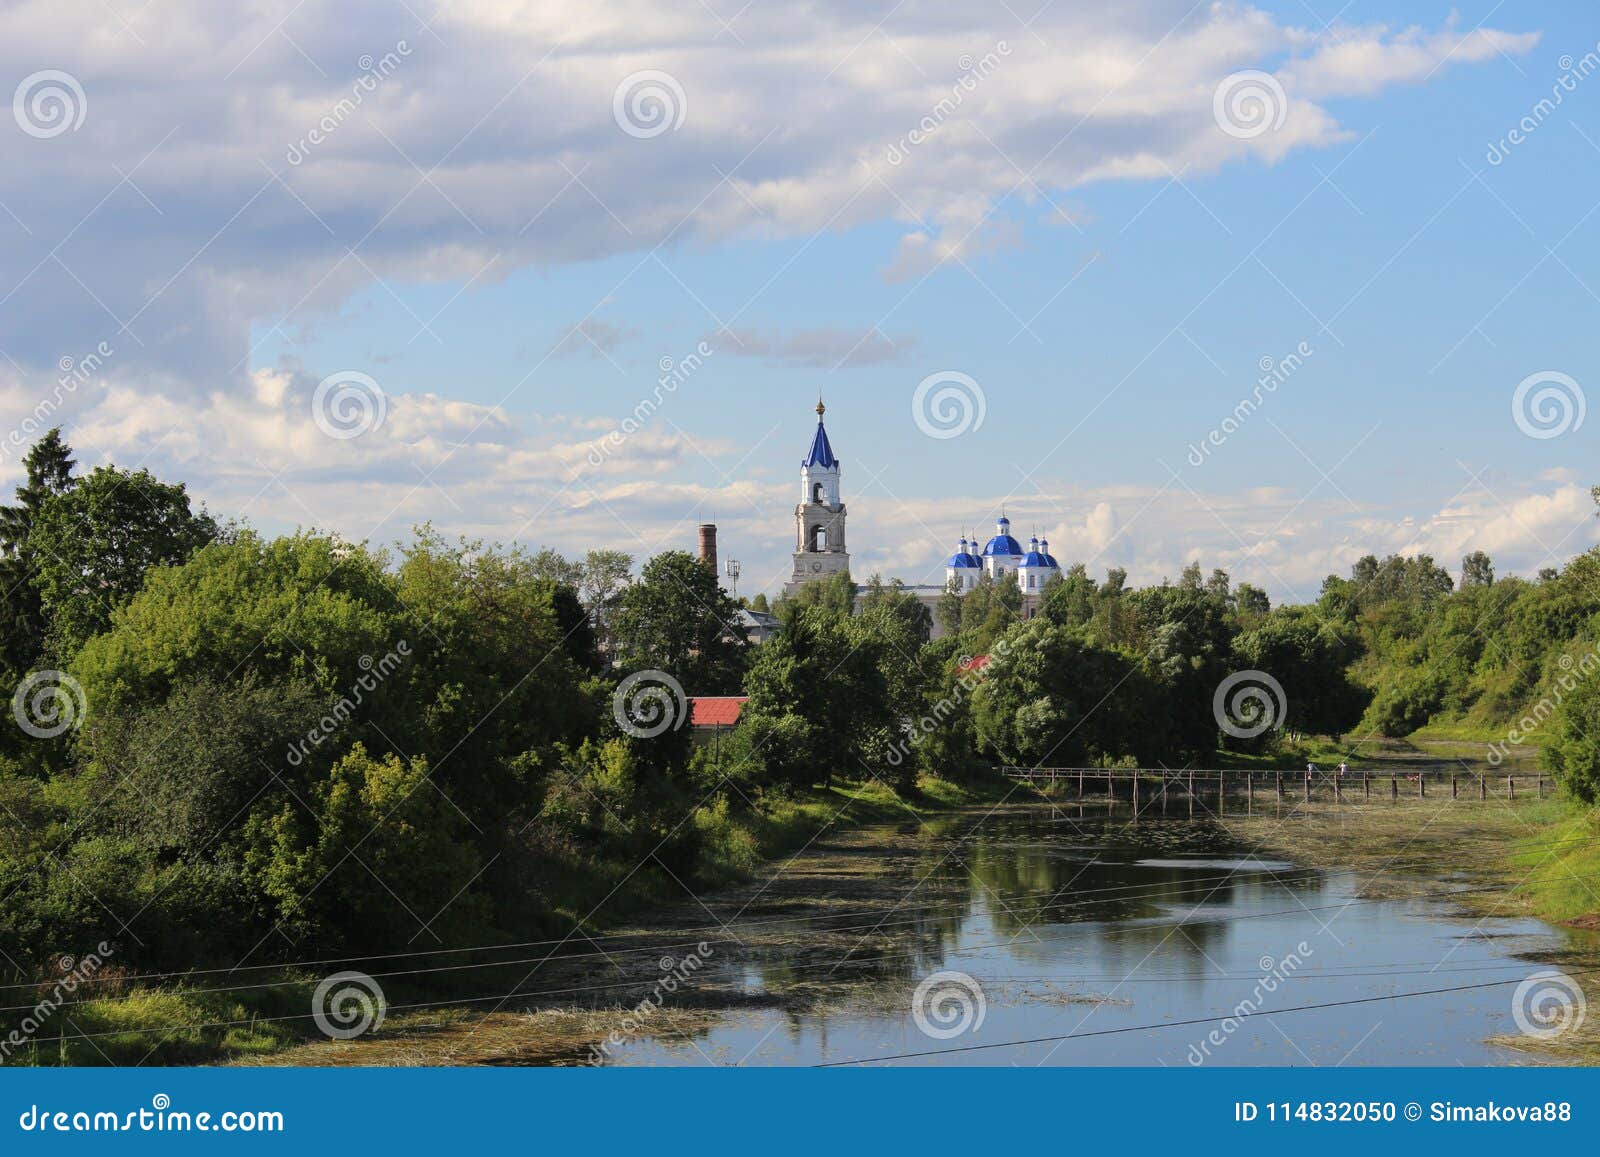 Voskresensky Cathedral among green trees against the blue sky, the city of Kashin, Tver region. The Voskresensky Cathedral among the summer green trees, near the river against the blue sky, the city of Kashin, Tver region